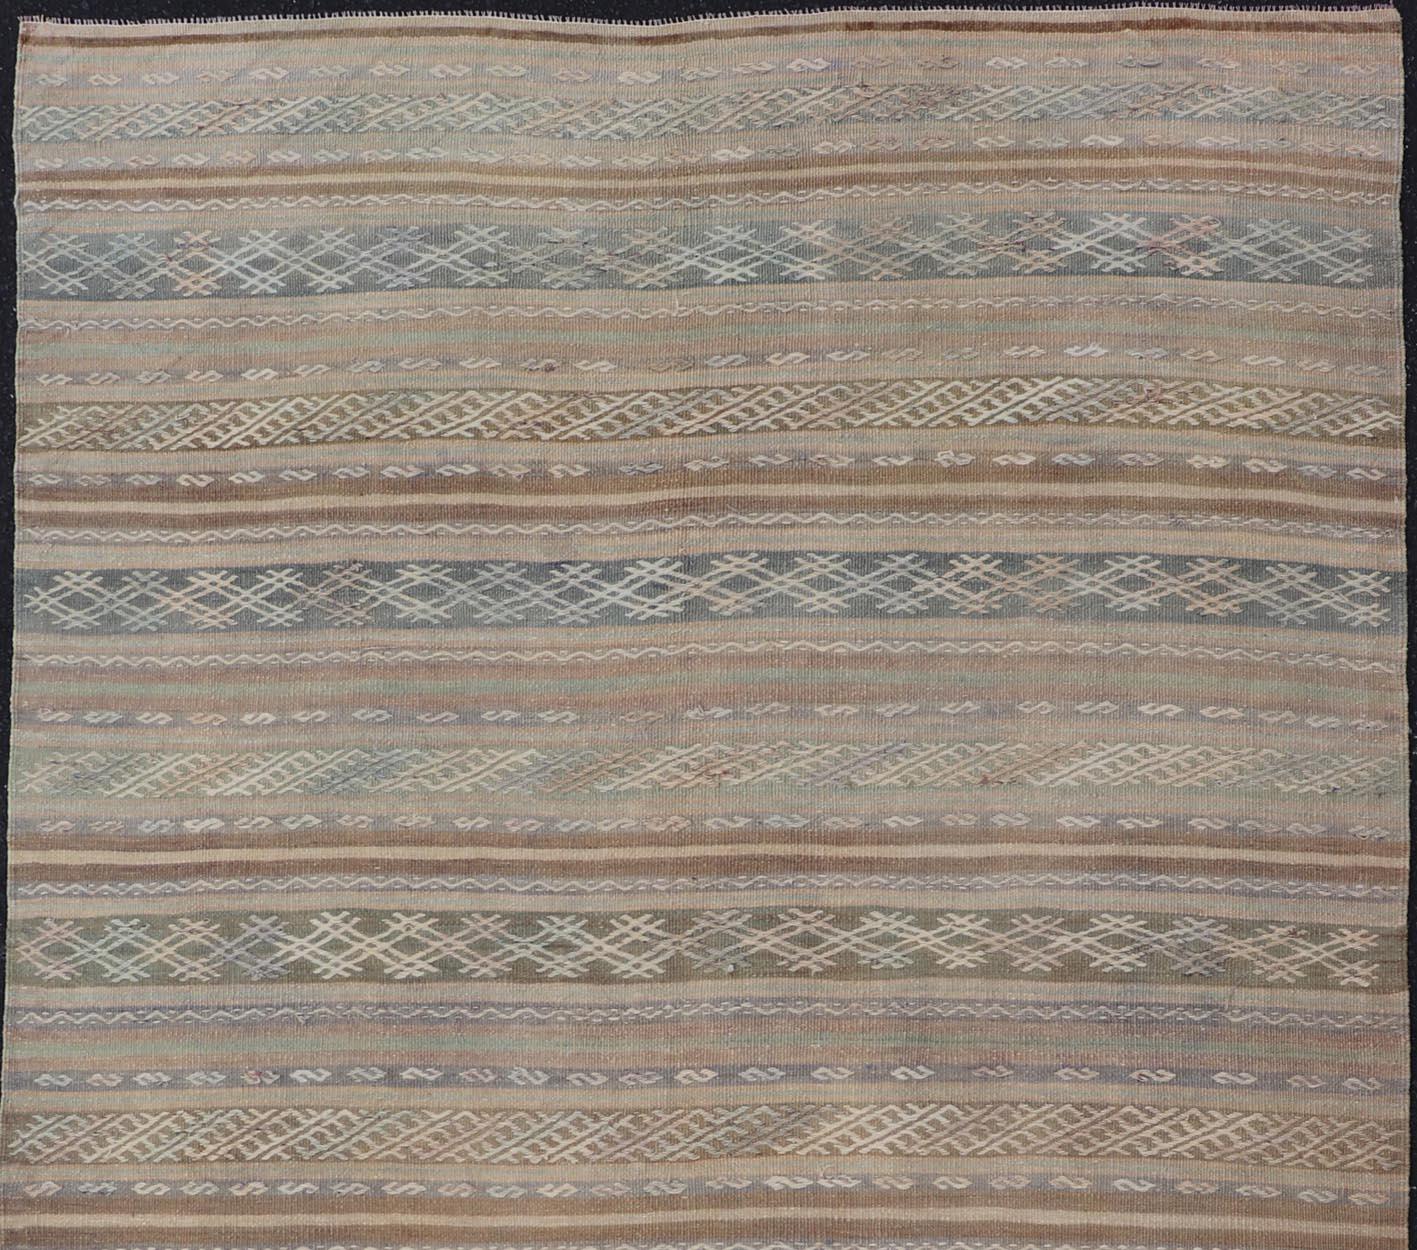 Hand-Woven Vintage Turkish Flat-Weave Kilim with Embroideries in Muted Tones and Stripes